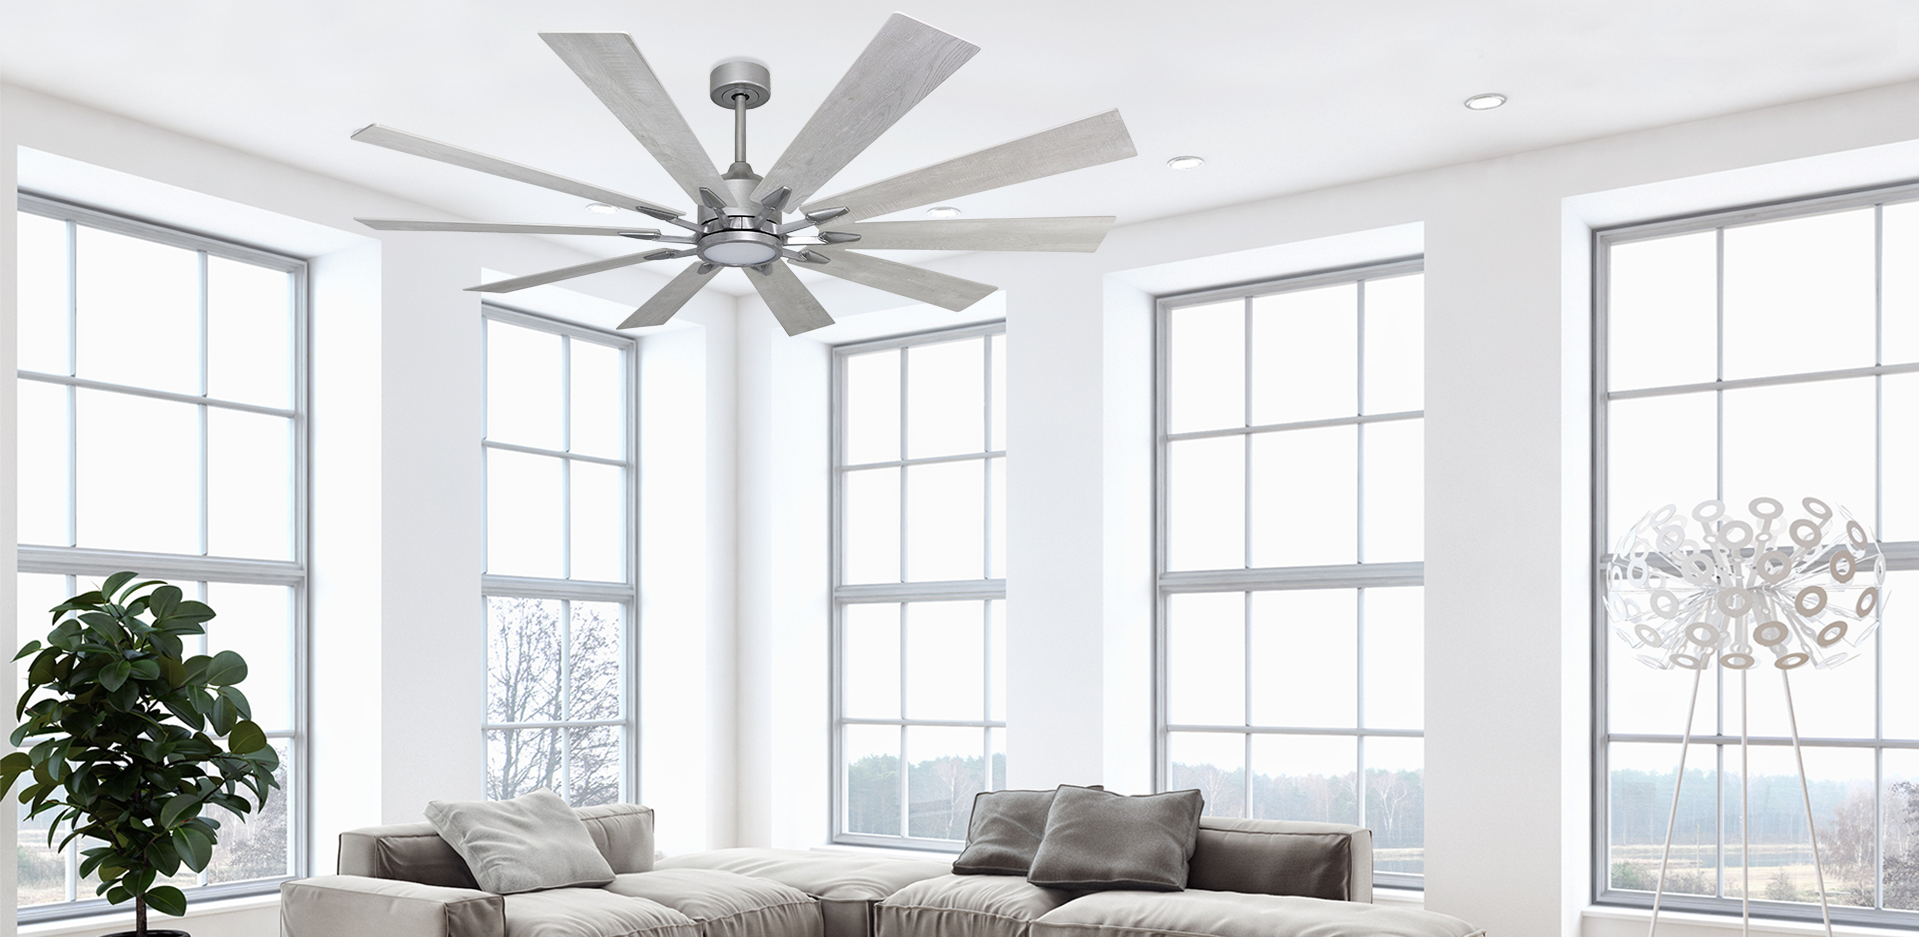 Fusion WiFi Enabled 66" Brushed Nickel Ceiling Fan with LED Light and Remote